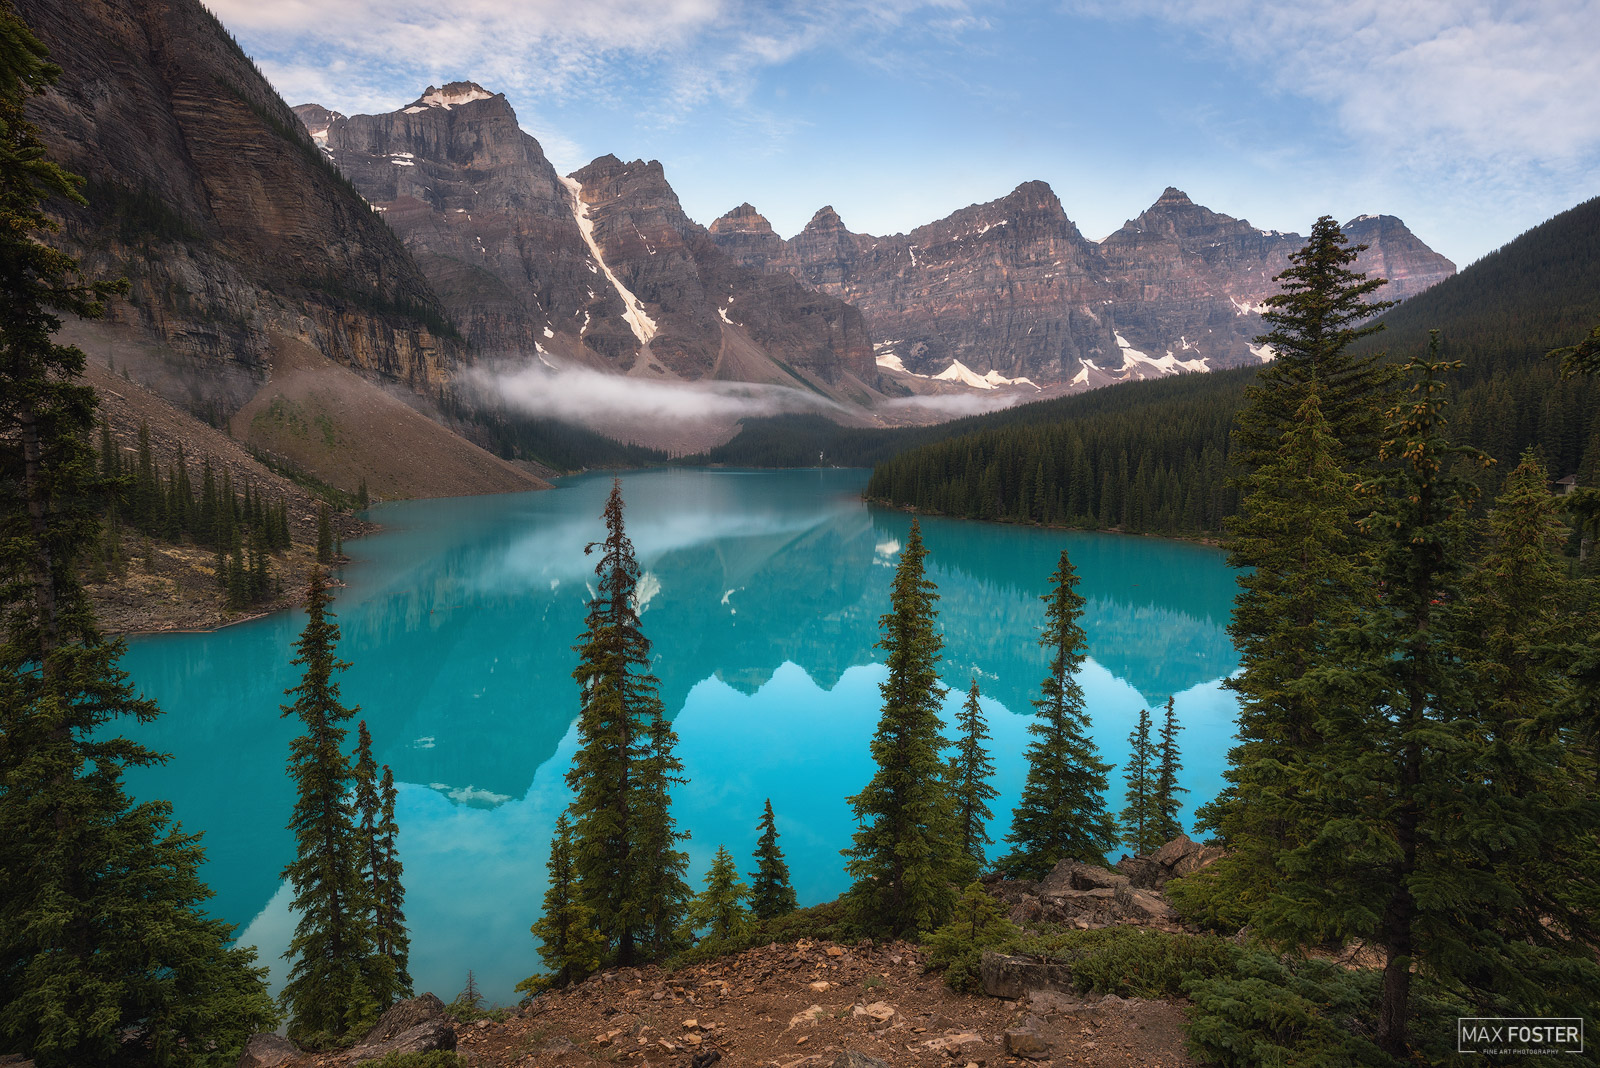 Bring nature into your home with The Gathering, Max Foster's limited edition photography print of Moraine Lake in Banff National...